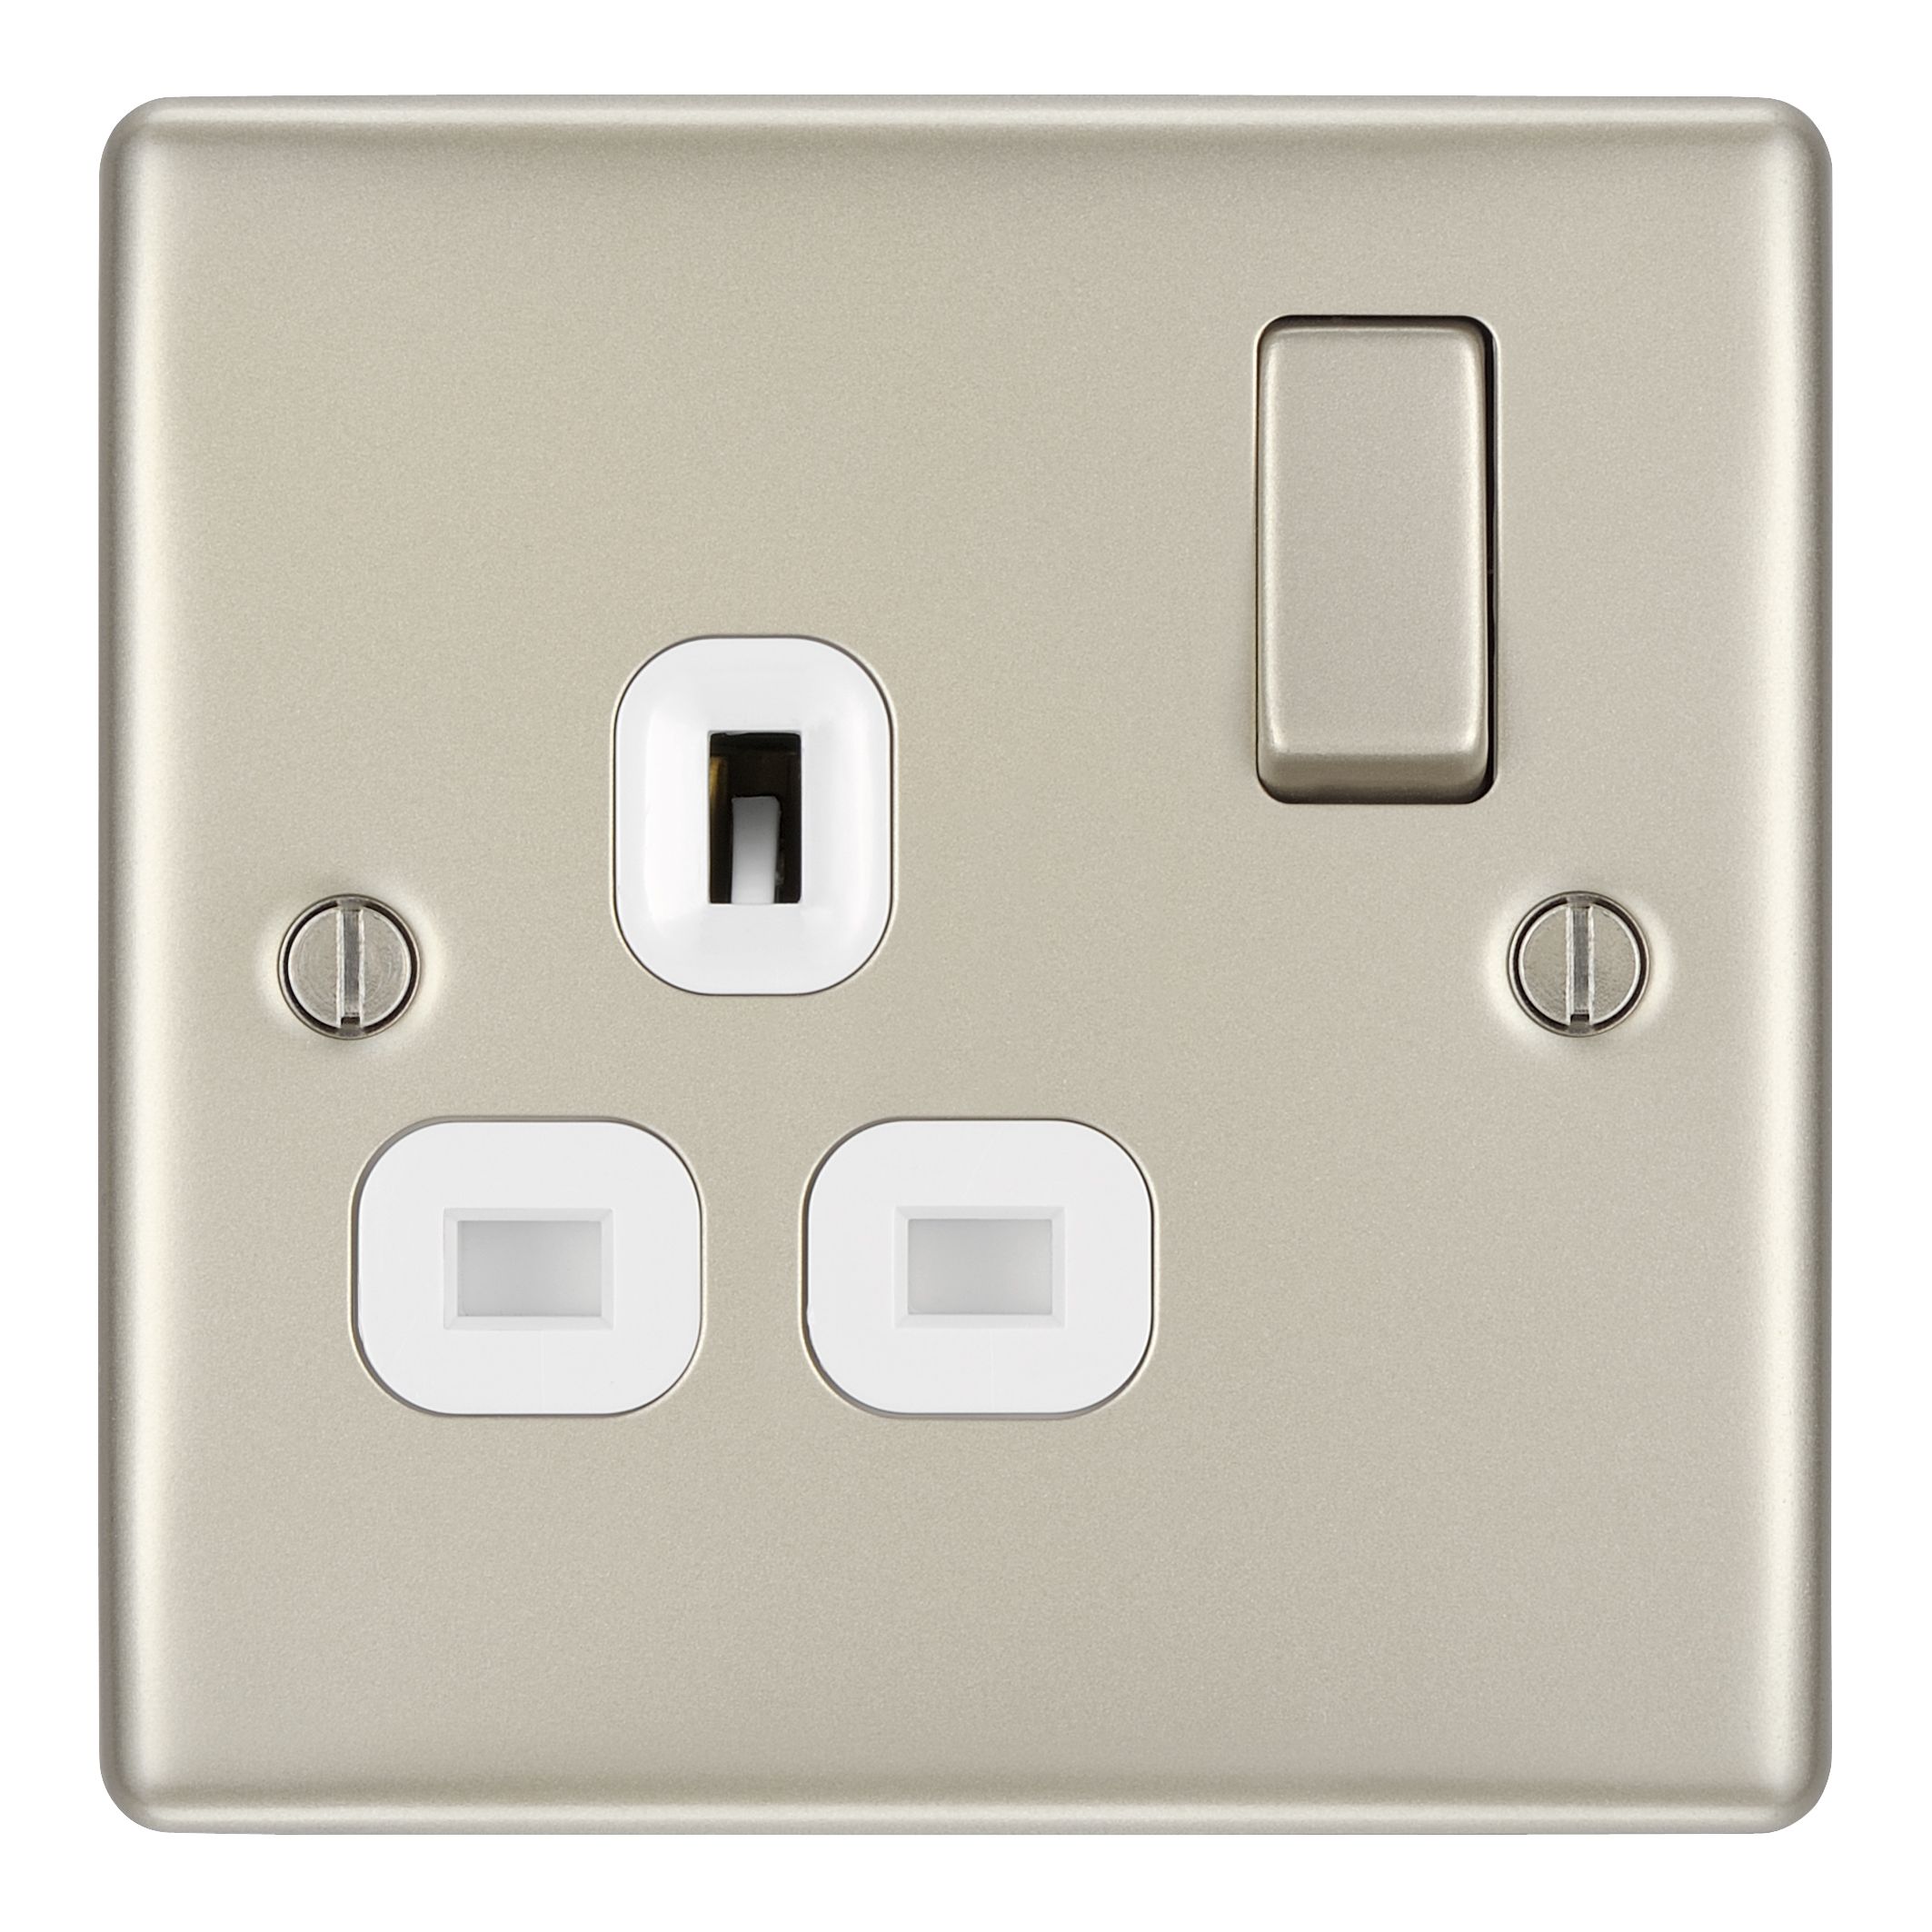 BG Nickel Single 13A Switched Socket & White inserts